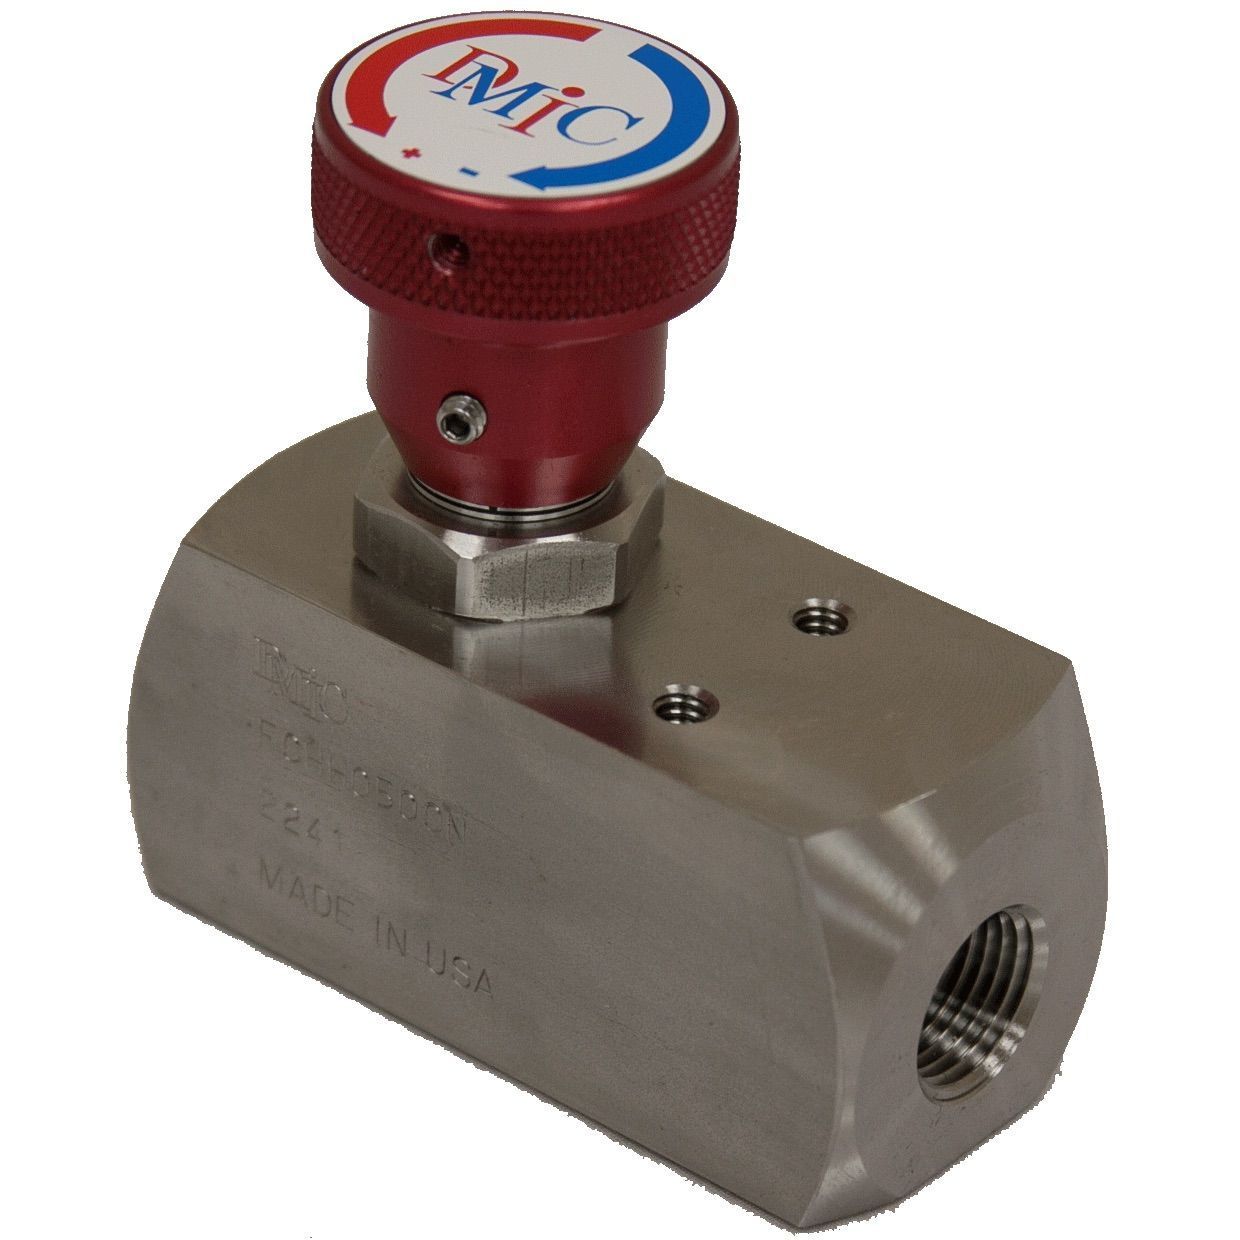 FCHH-0750S-1141 : DMIC Flow Control, Unidirectional, with Integrated Check, #12 SAE (3/4"), Carbon Steel, 10000psi